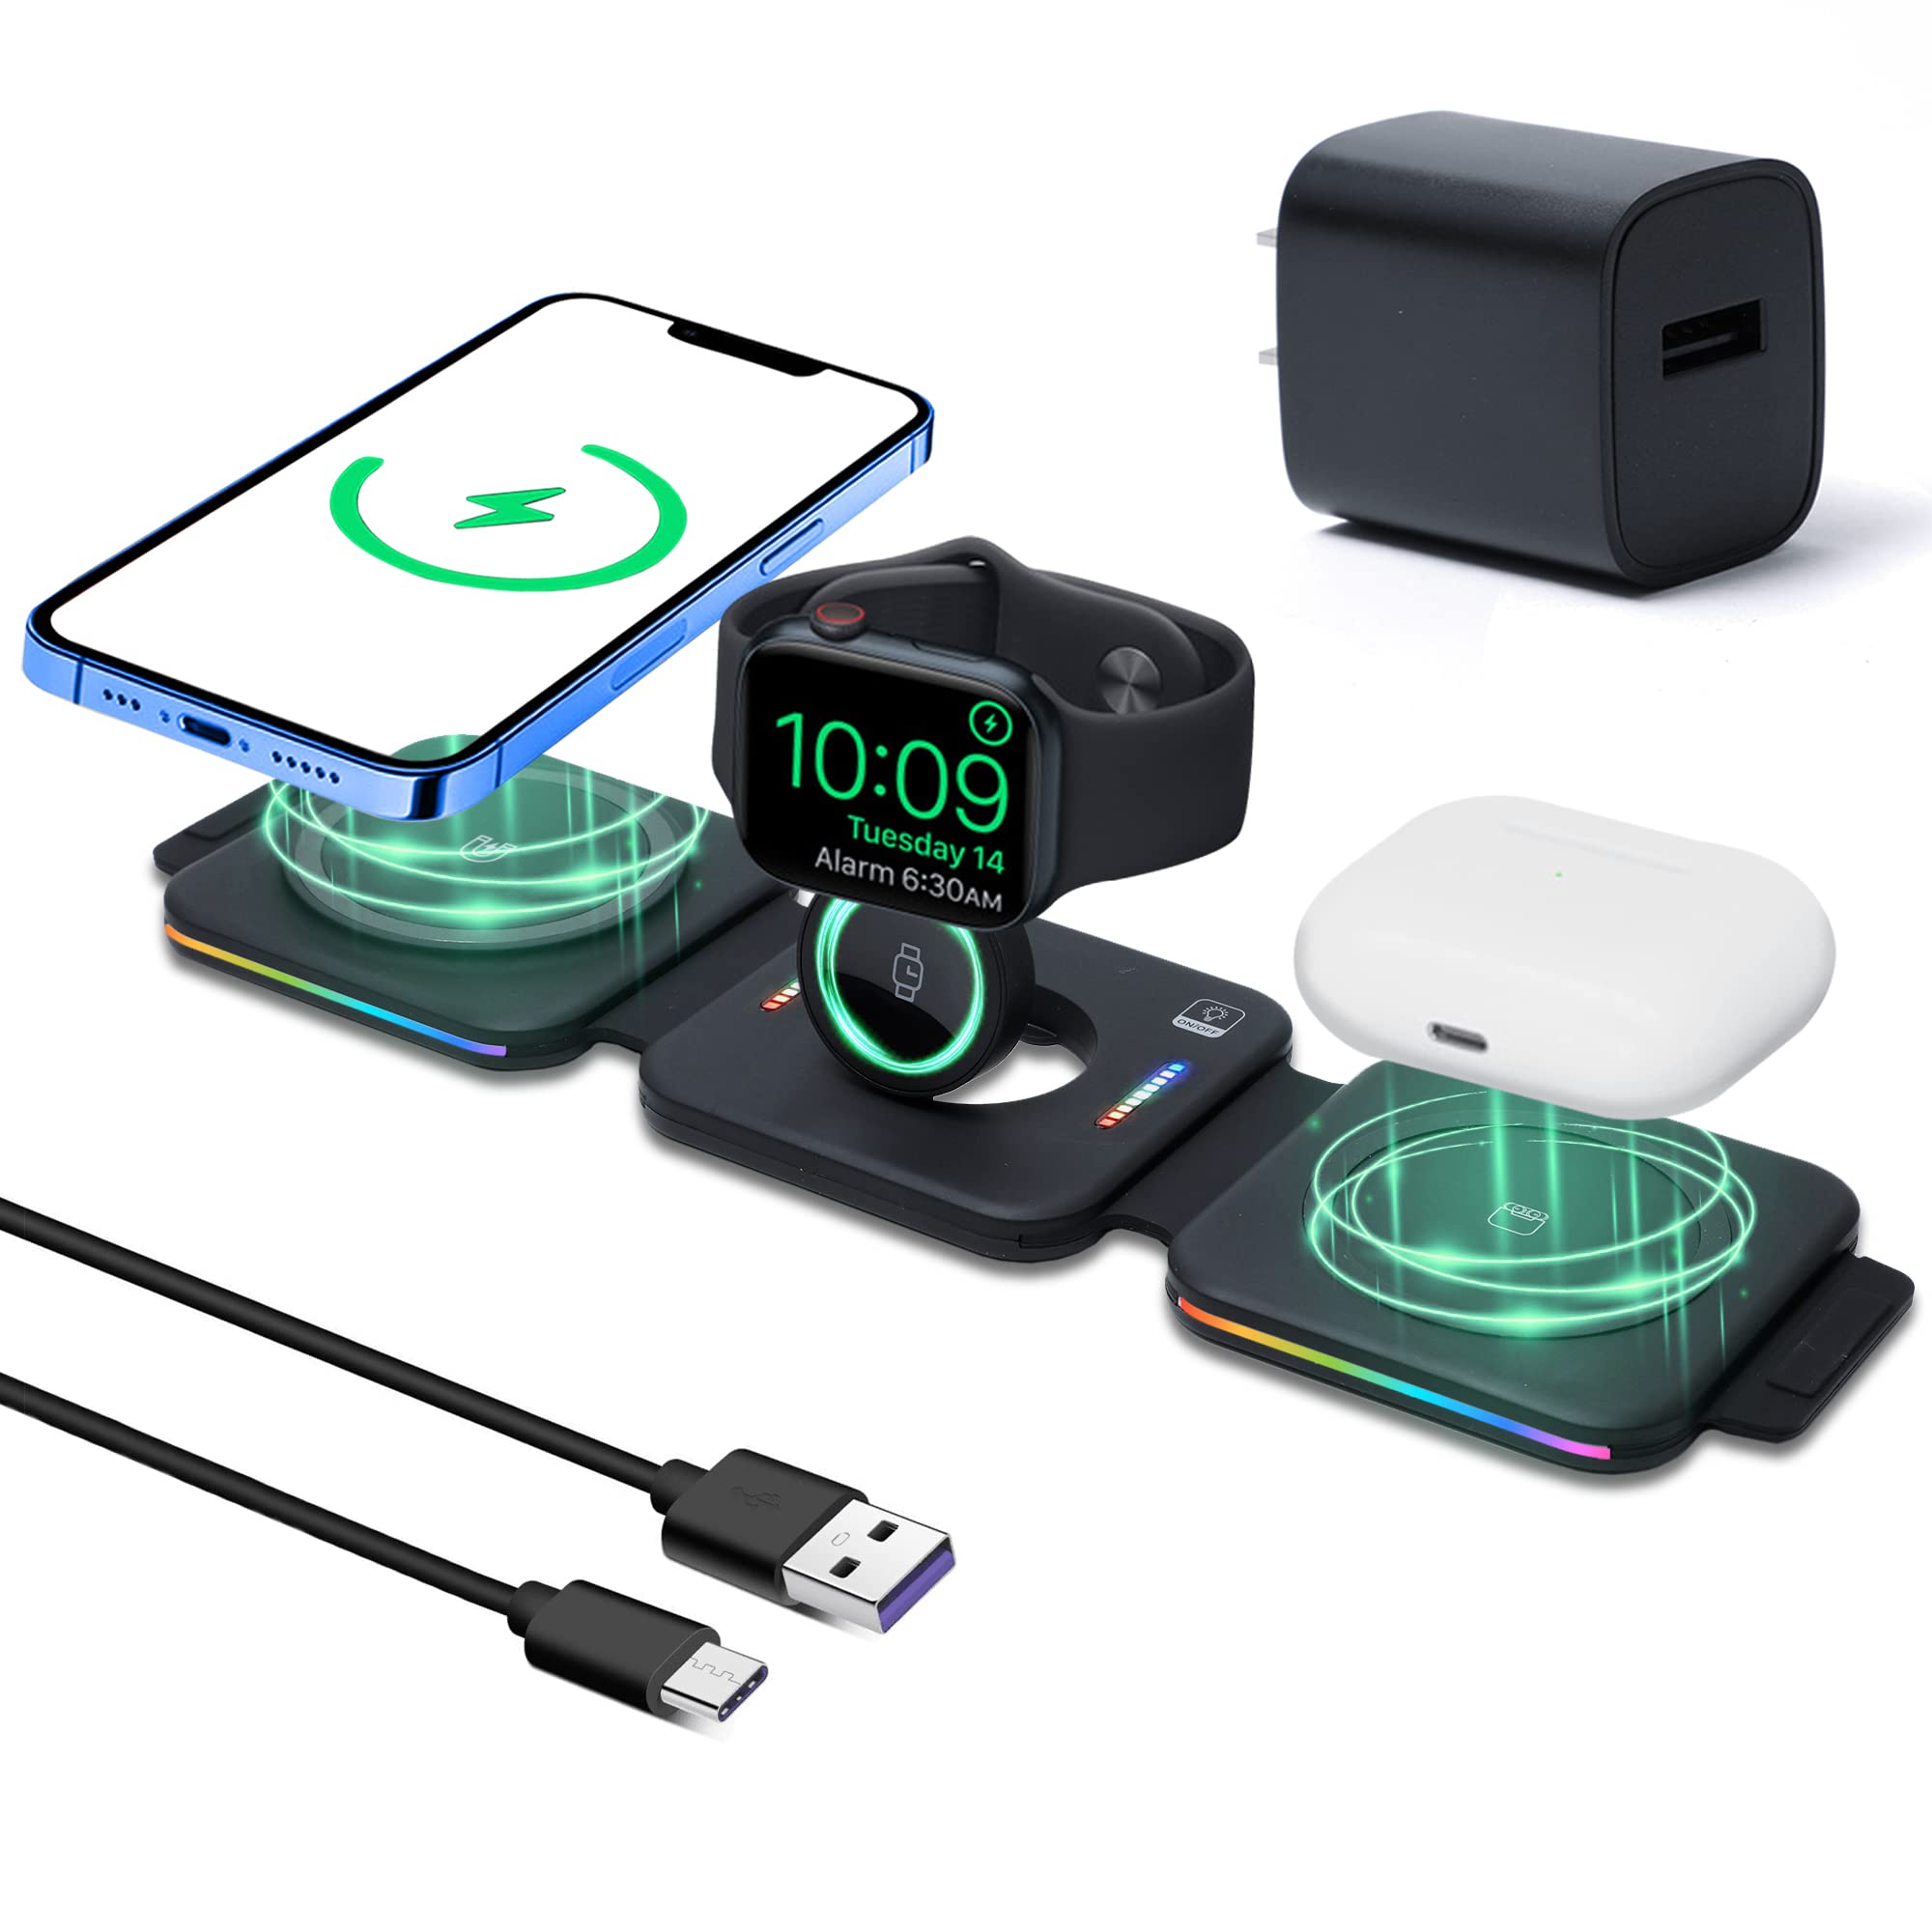 DIY Innovation: Creating Your Own Wireless Charging Circuit